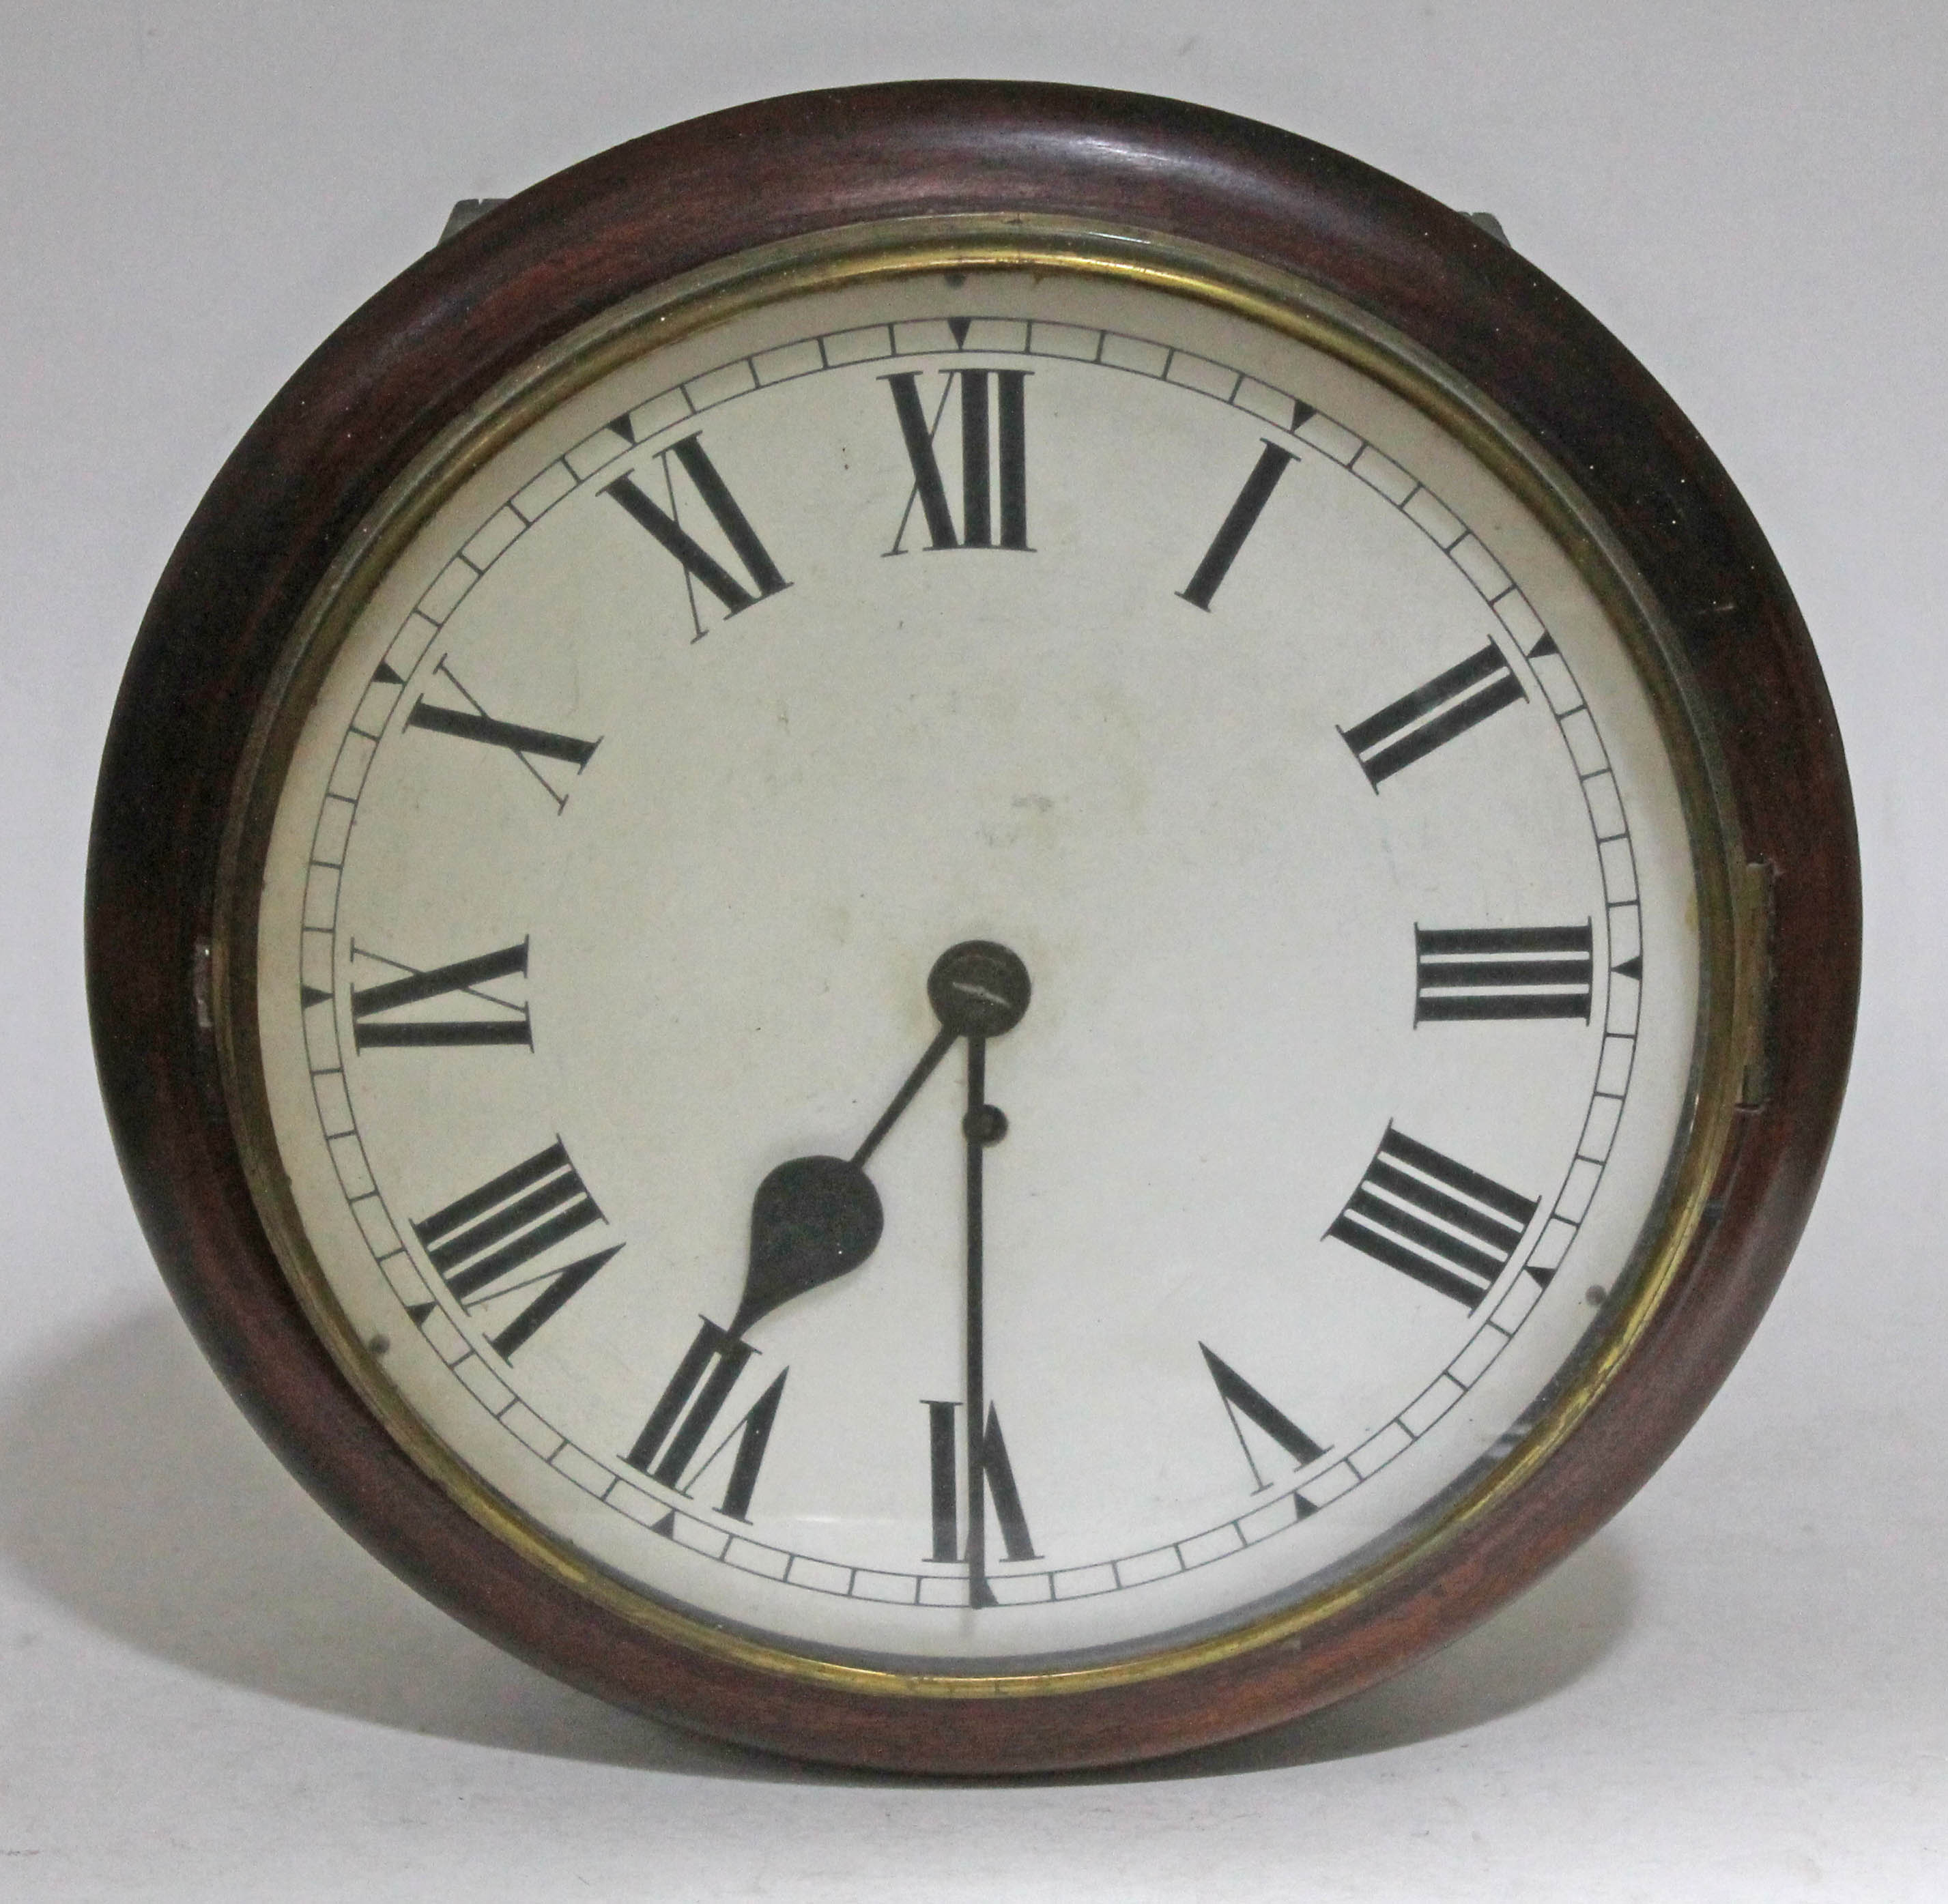 A single fusee wire driven round wall clock, total diam. 36.5cm. Condition: dial with minor marks